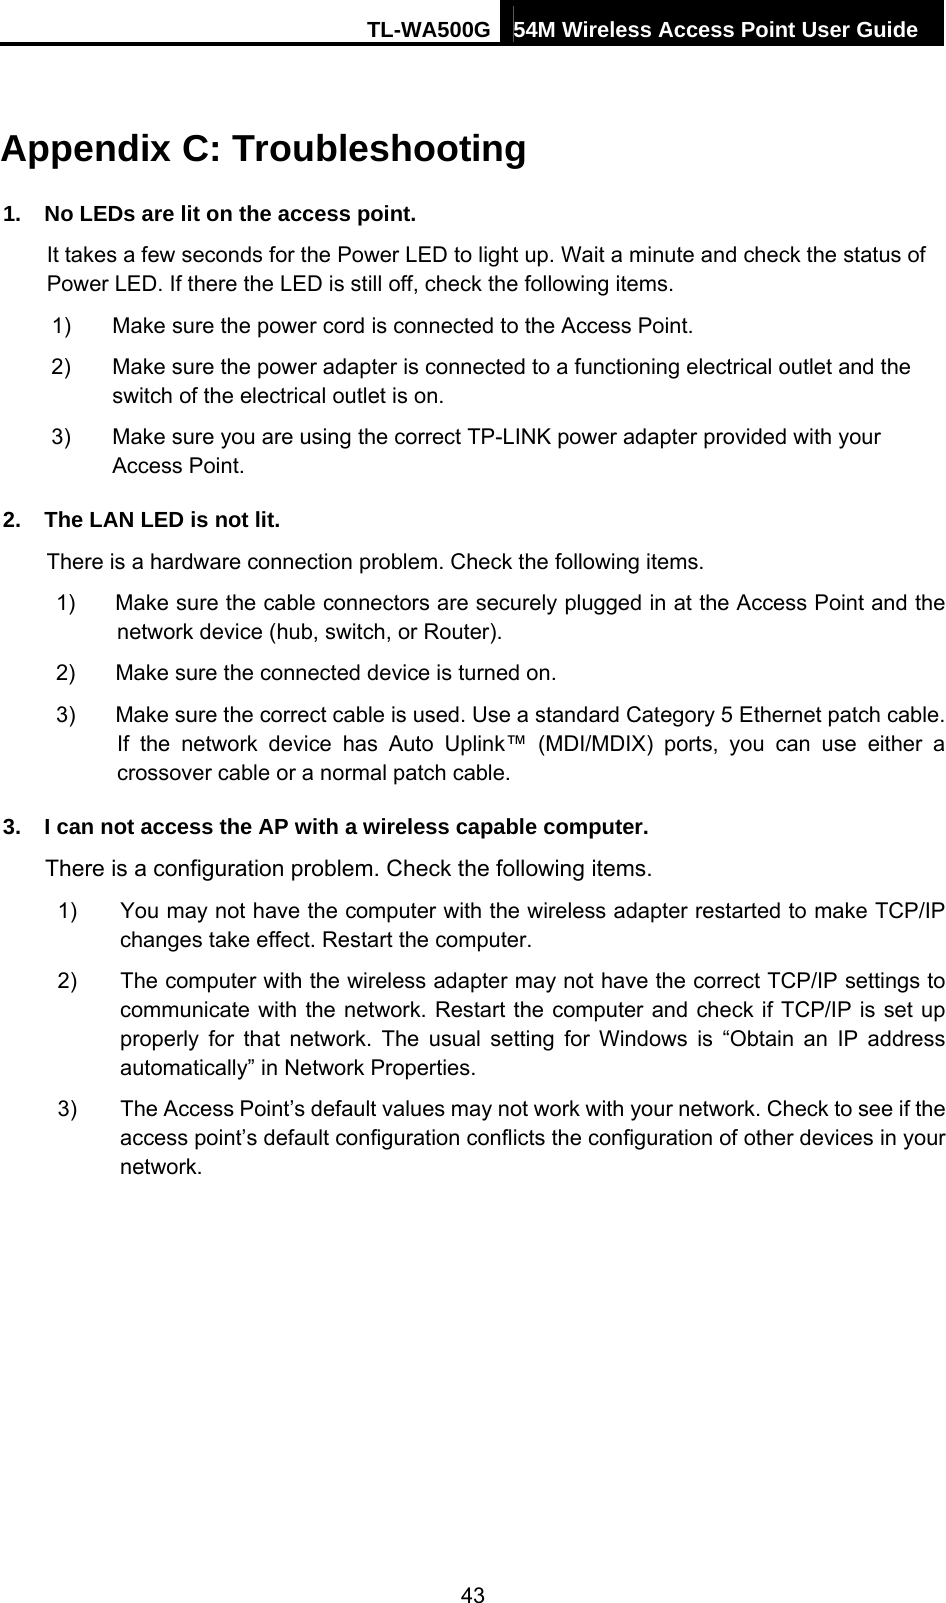 TL-WA500G 54M Wireless Access Point User Guide  Appendix C: Troubleshooting 1.  No LEDs are lit on the access point. It takes a few seconds for the Power LED to light up. Wait a minute and check the status of Power LED. If there the LED is still off, check the following items. 1)  Make sure the power cord is connected to the Access Point. 2)  Make sure the power adapter is connected to a functioning electrical outlet and the switch of the electrical outlet is on. 3)  Make sure you are using the correct TP-LINK power adapter provided with your Access Point. 2.  The LAN LED is not lit. There is a hardware connection problem. Check the following items. 1)  Make sure the cable connectors are securely plugged in at the Access Point and the network device (hub, switch, or Router). 2)  Make sure the connected device is turned on. 3)  Make sure the correct cable is used. Use a standard Category 5 Ethernet patch cable. If the network device has Auto Uplink™ (MDI/MDIX) ports, you can use either a crossover cable or a normal patch cable. 3.  I can not access the AP with a wireless capable computer. There is a configuration problem. Check the following items. 1)  You may not have the computer with the wireless adapter restarted to make TCP/IP changes take effect. Restart the computer. 2)  The computer with the wireless adapter may not have the correct TCP/IP settings to communicate with the network. Restart the computer and check if TCP/IP is set up properly for that network. The usual setting for Windows is “Obtain an IP address automatically” in Network Properties. 3)  The Access Point’s default values may not work with your network. Check to see if the access point’s default configuration conflicts the configuration of other devices in your network. 43 